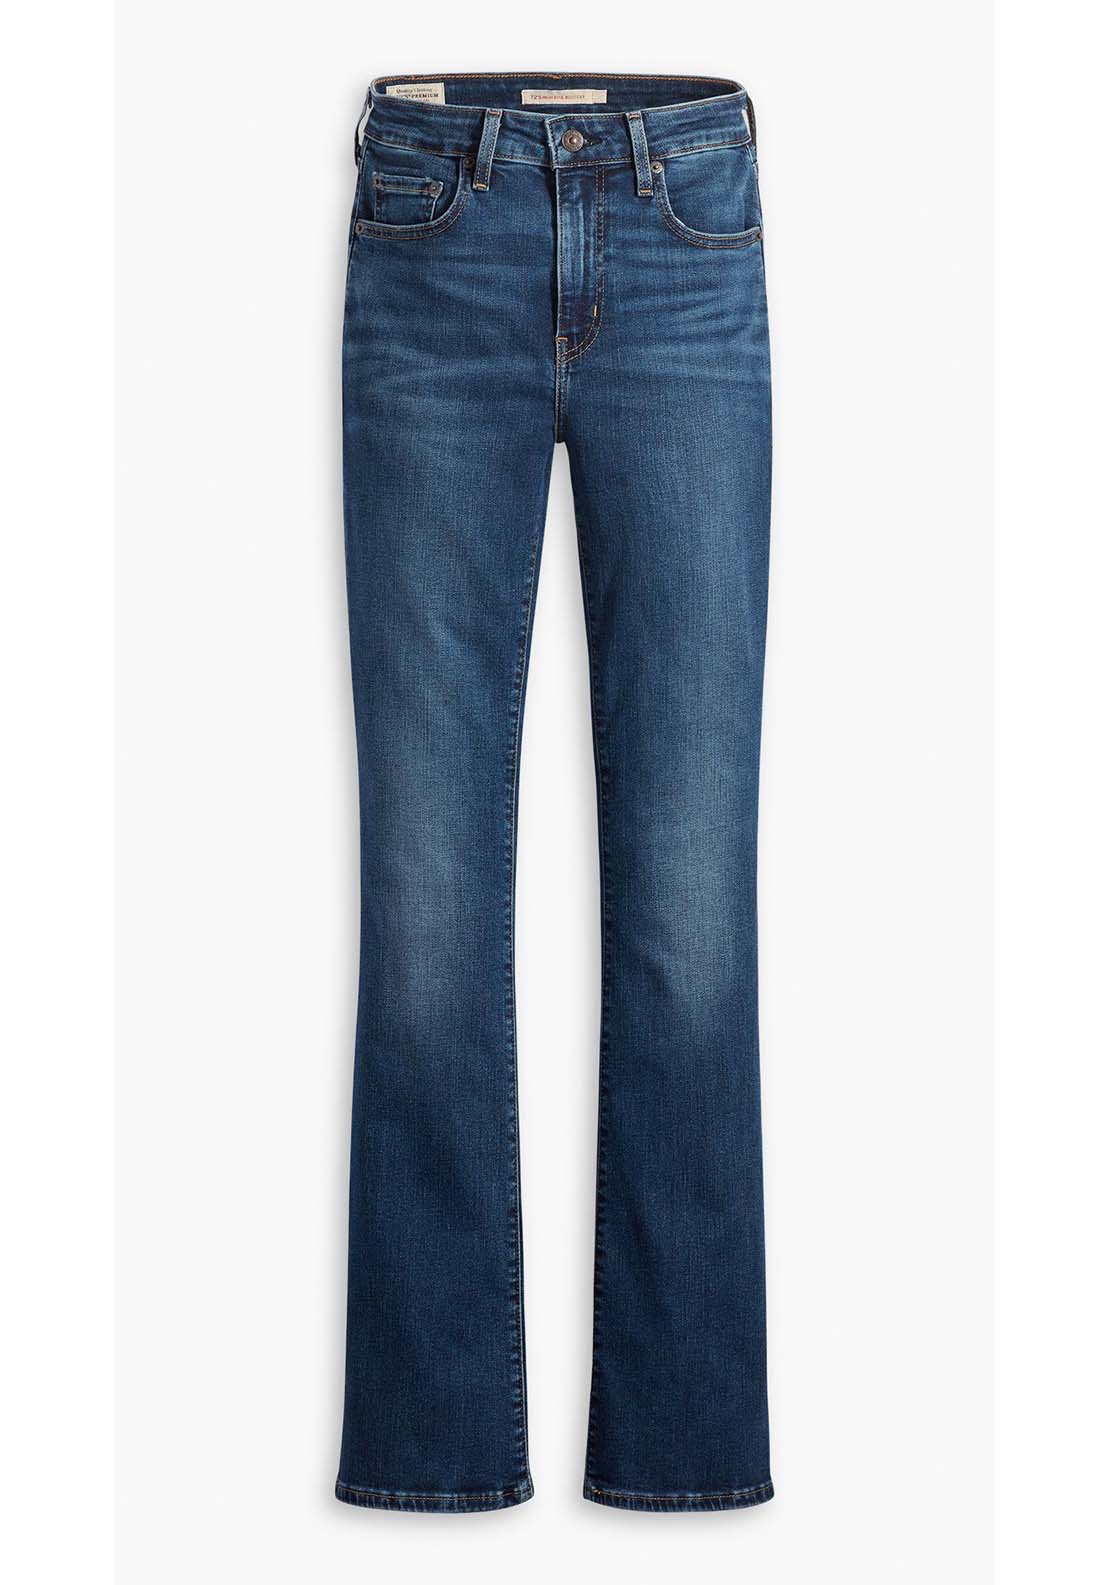 Levis 725 High Rise Bootcut 6 Shaws Department Stores